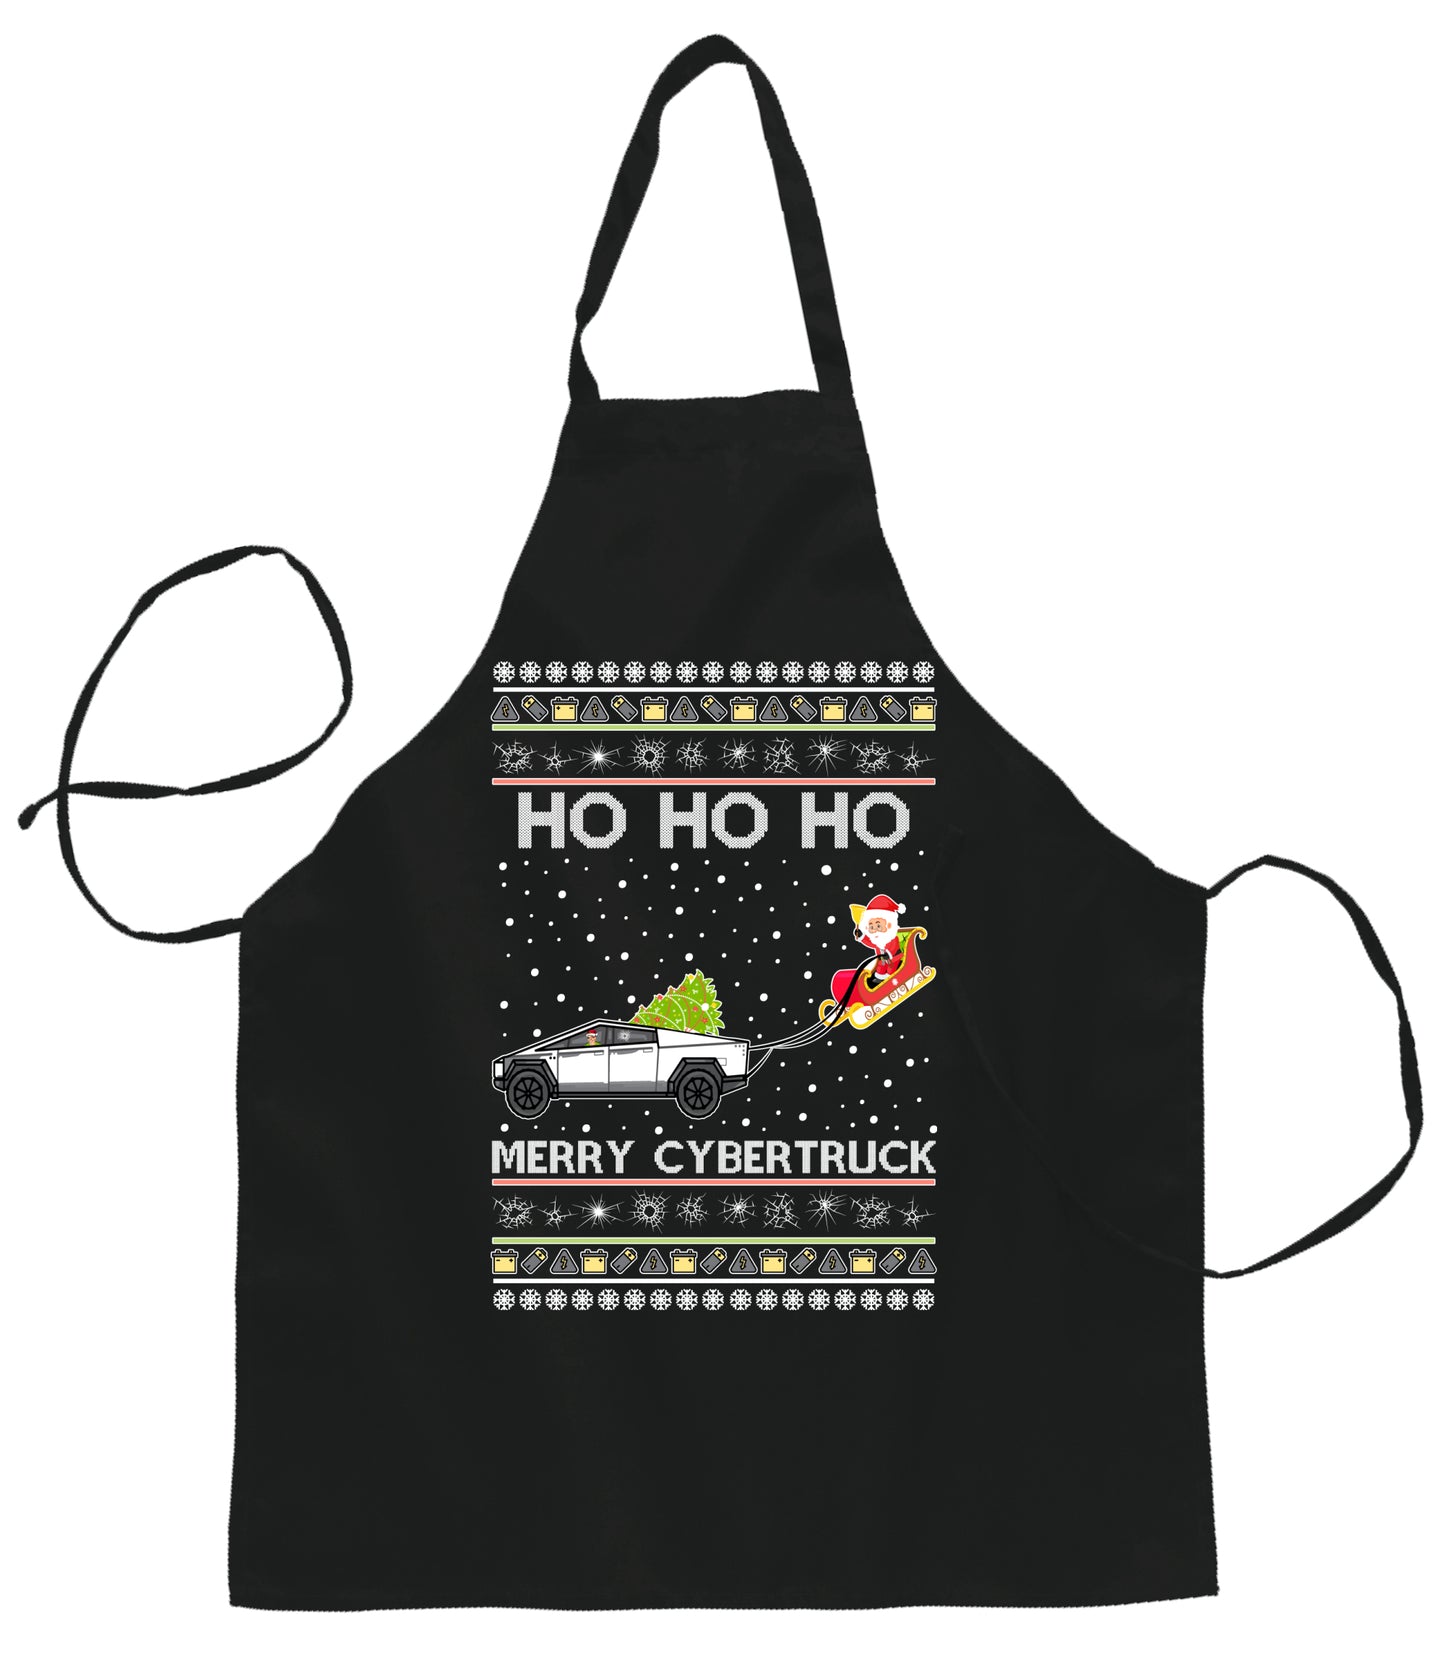 Ugly Ugly Christmas Ho Ho Ho Merry Cybertruck Ugly Christmas Sweater Ugly Christmas Butcher Graphic Apron for Kitchen BBQ Grilling Cooking